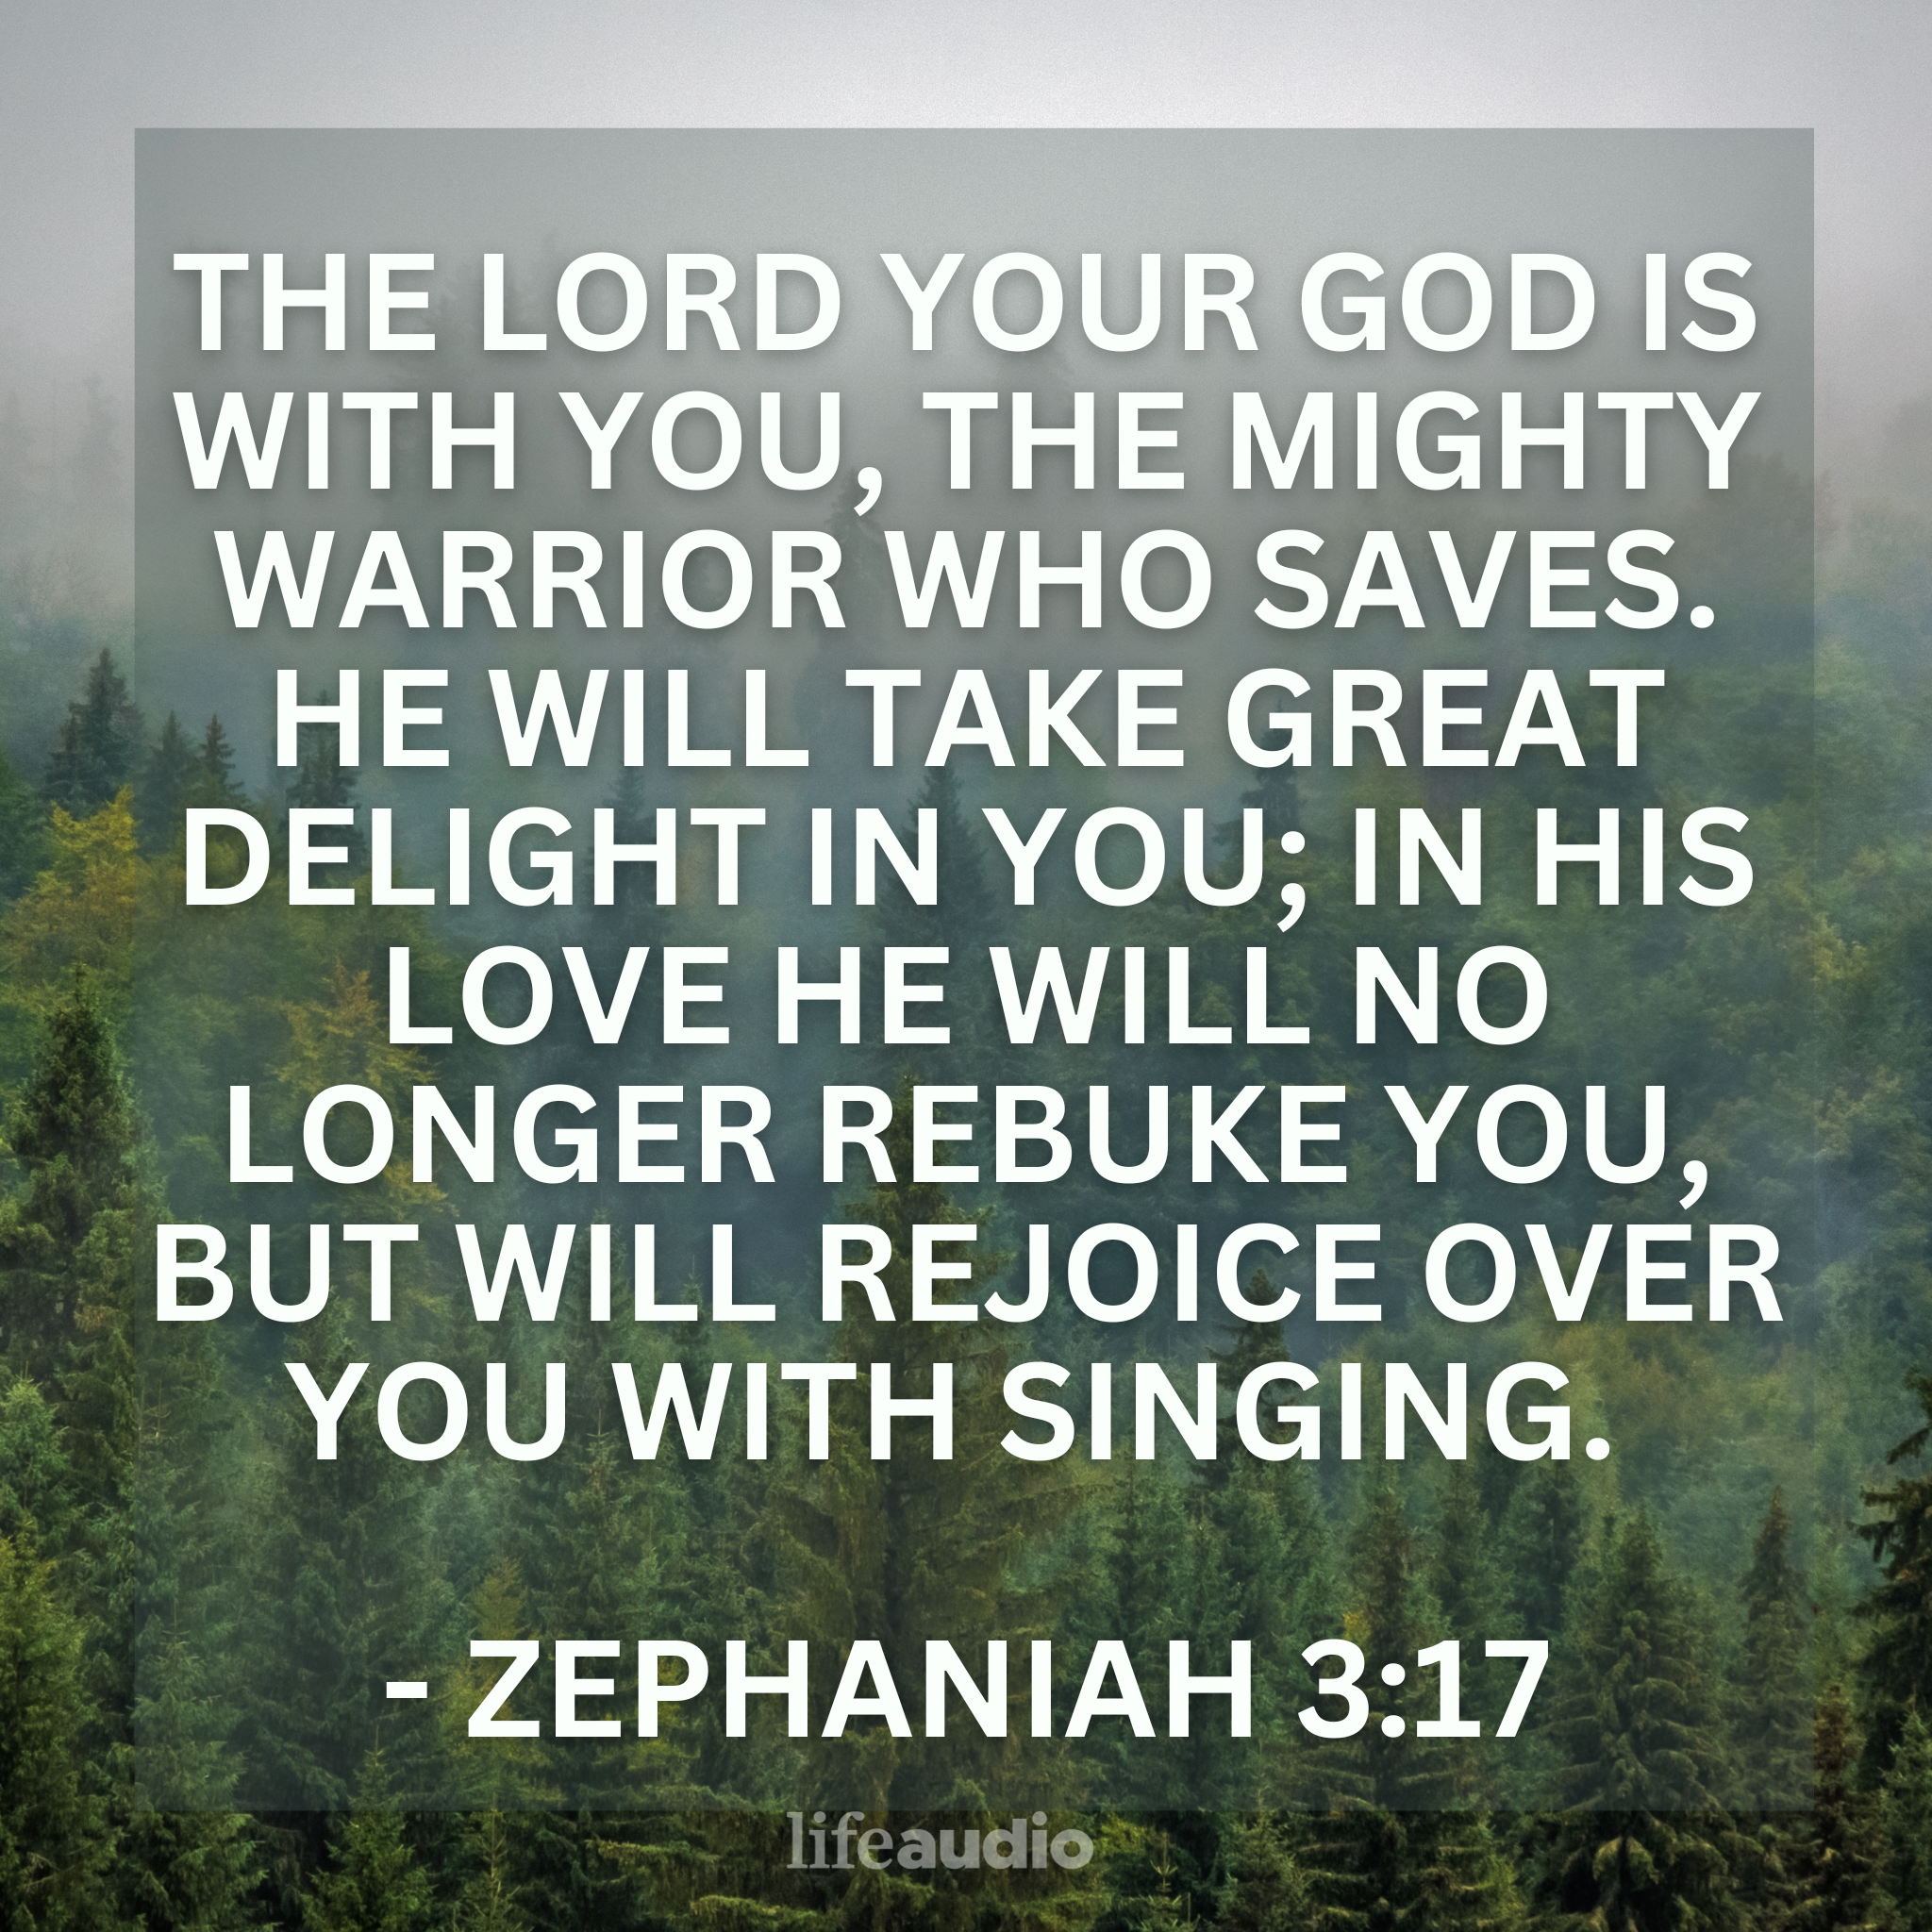 Best Of: What Does God's Love for You Look Like? (Zephaniah 3:17)